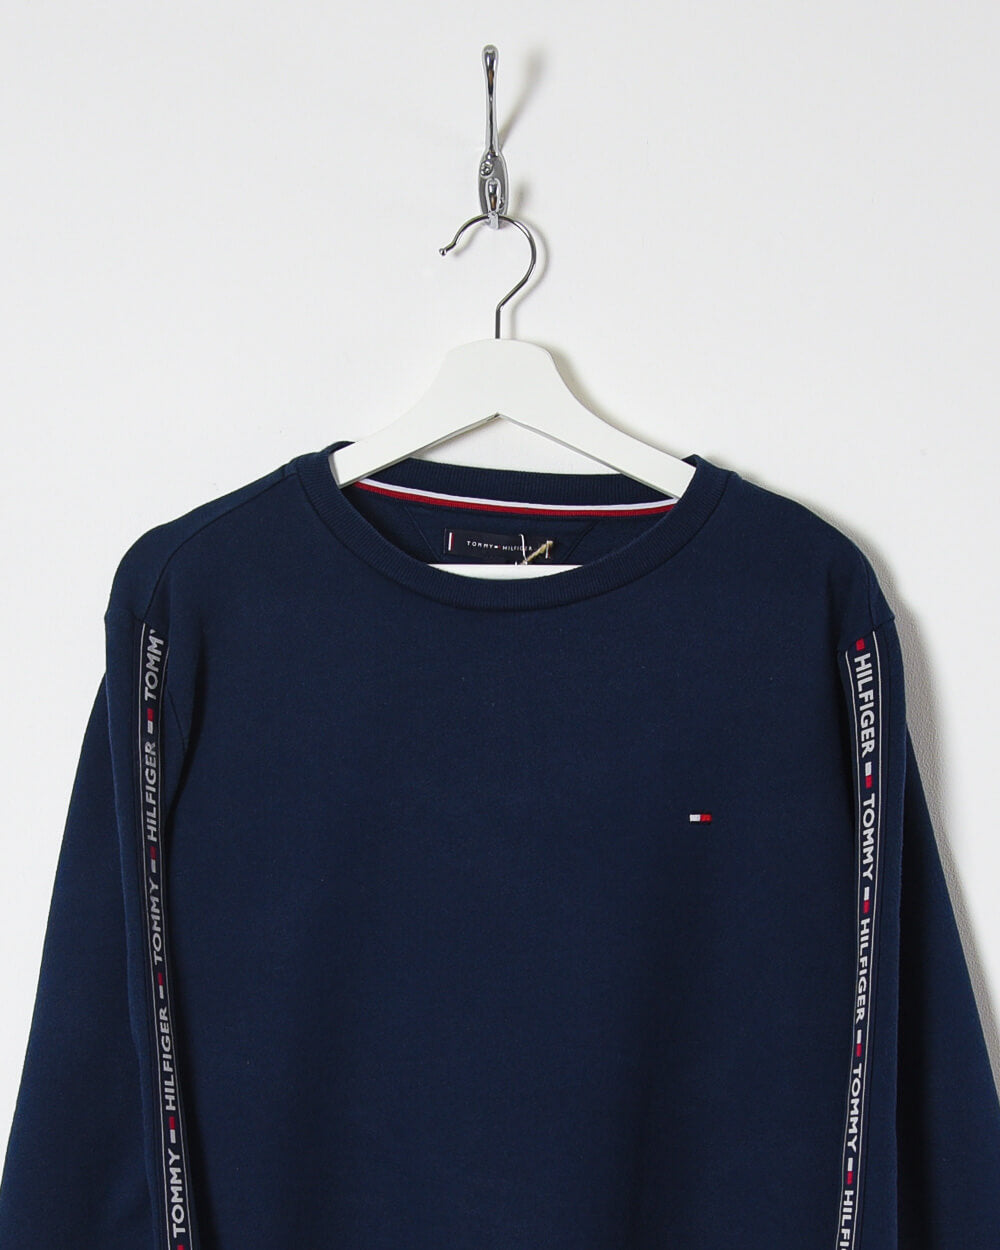 Tommy Hilfiger Sweatshirt - Large - Domno Vintage 90s, 80s, 00s Retro and Vintage Clothing 